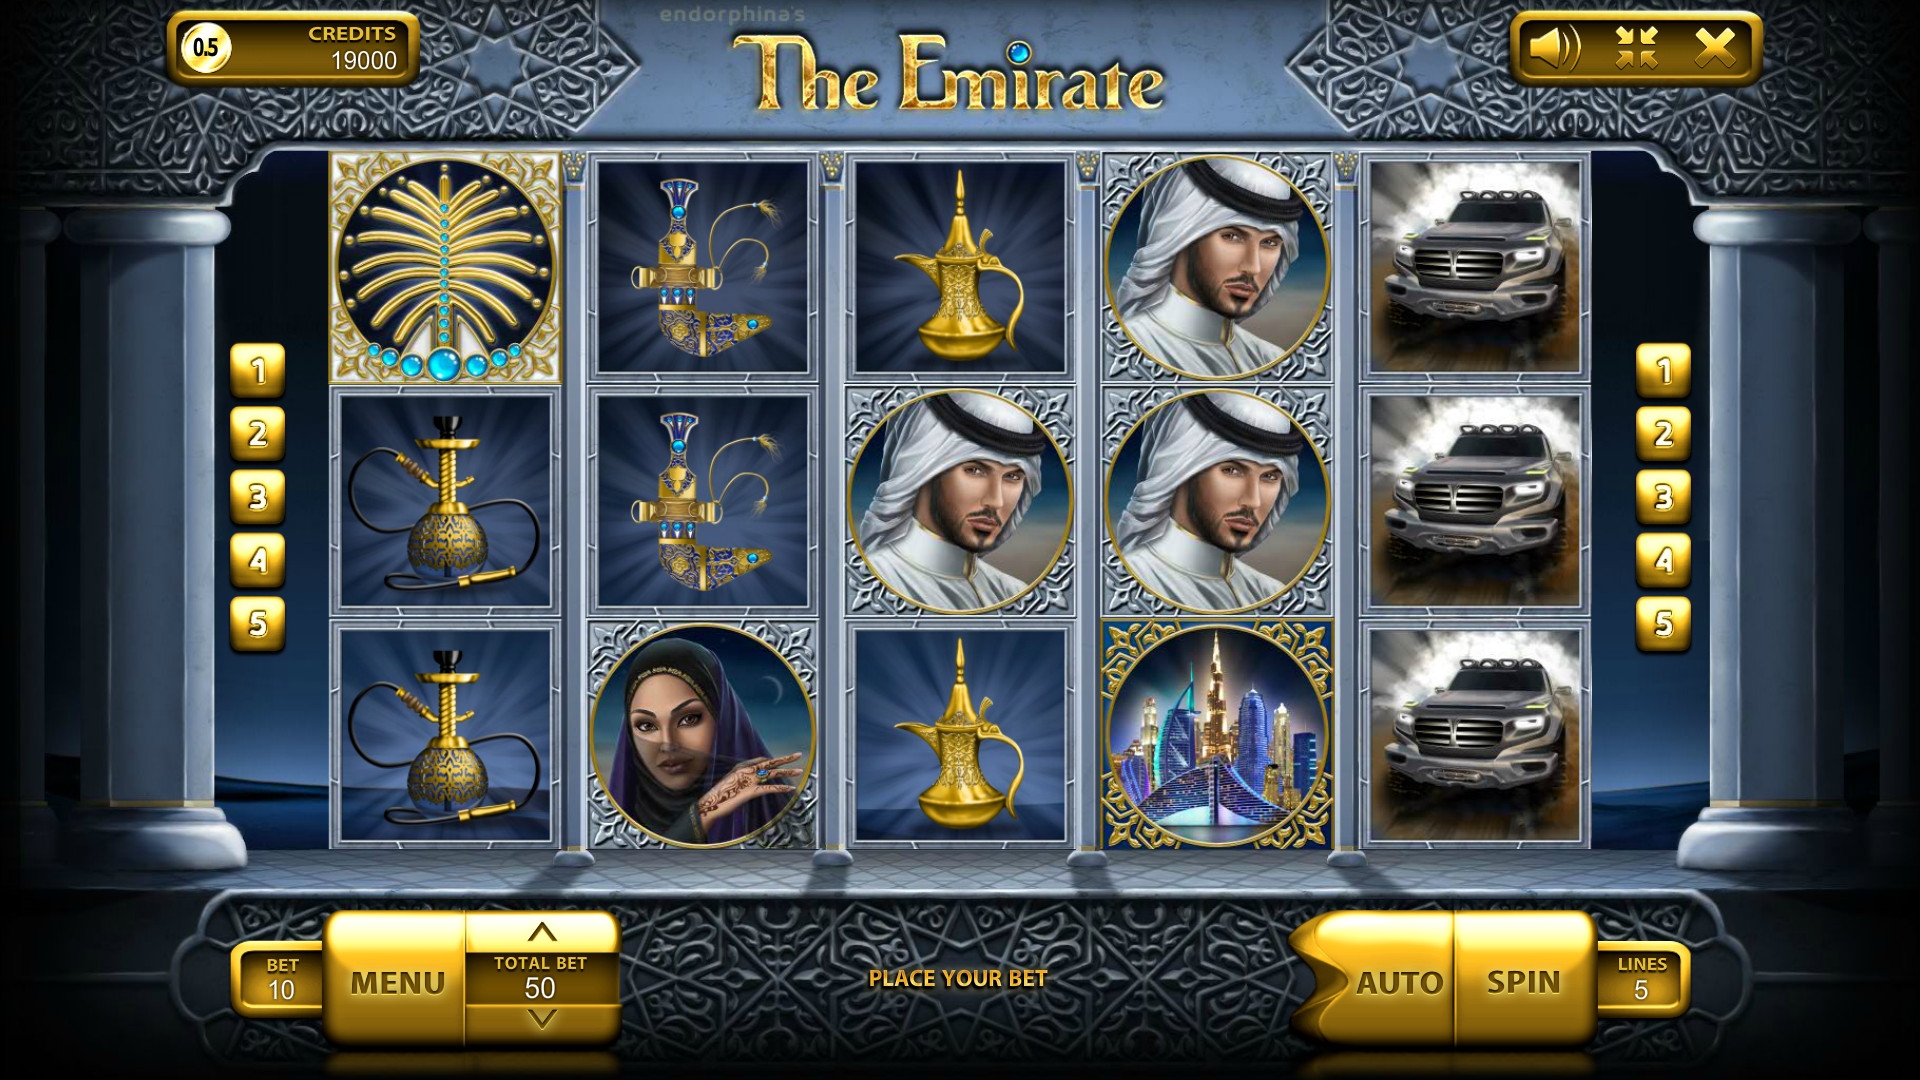 Emirate (Emirate) from category Slots